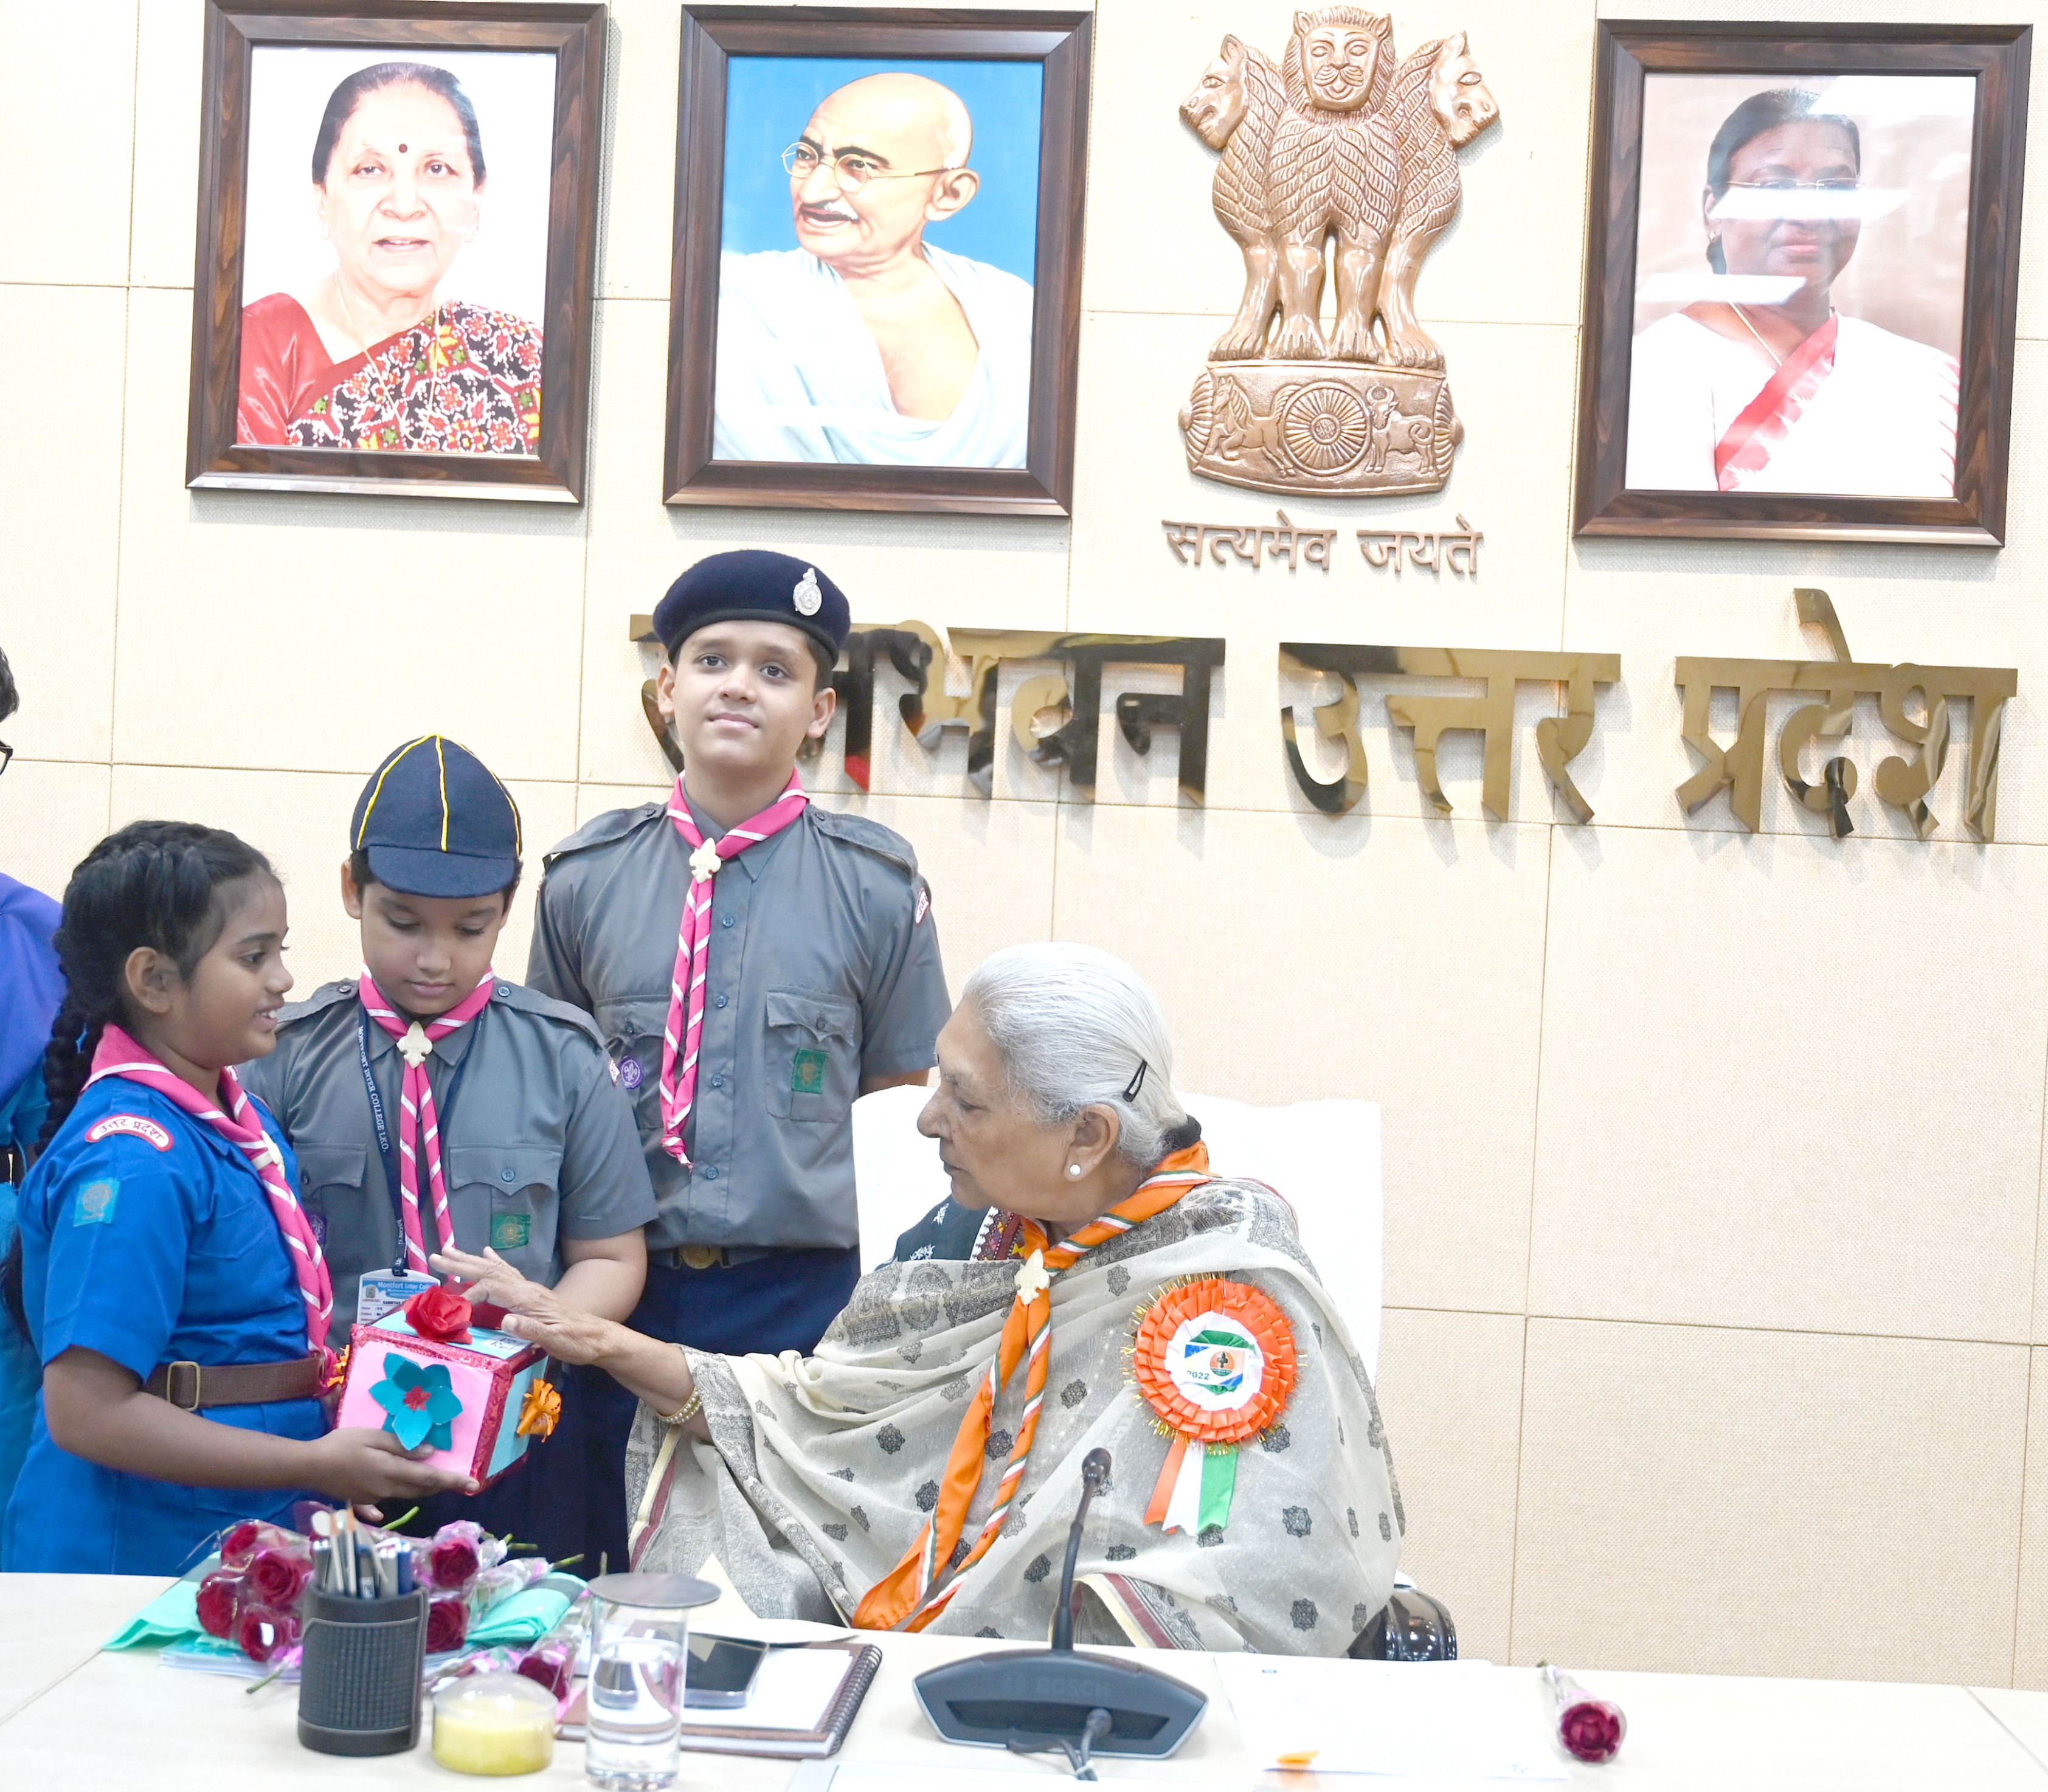 On the foundation day of Bharat Scouts and Guides, the office bearers of the organization honored the Governor